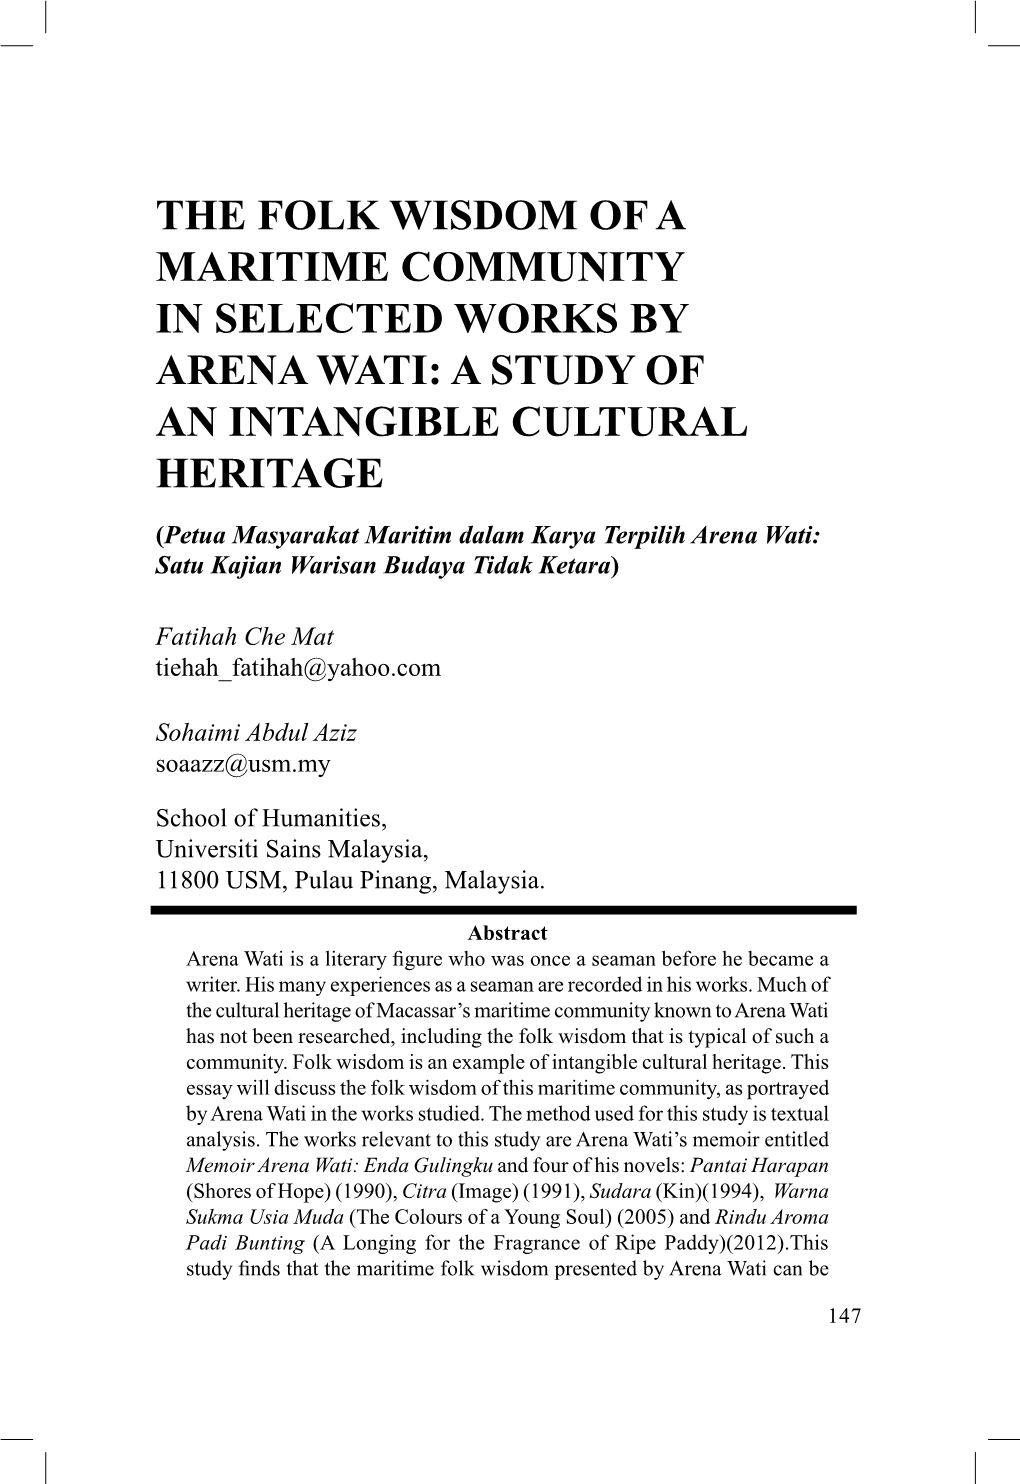 The Folk Wisdom of a Maritime Community in Selected